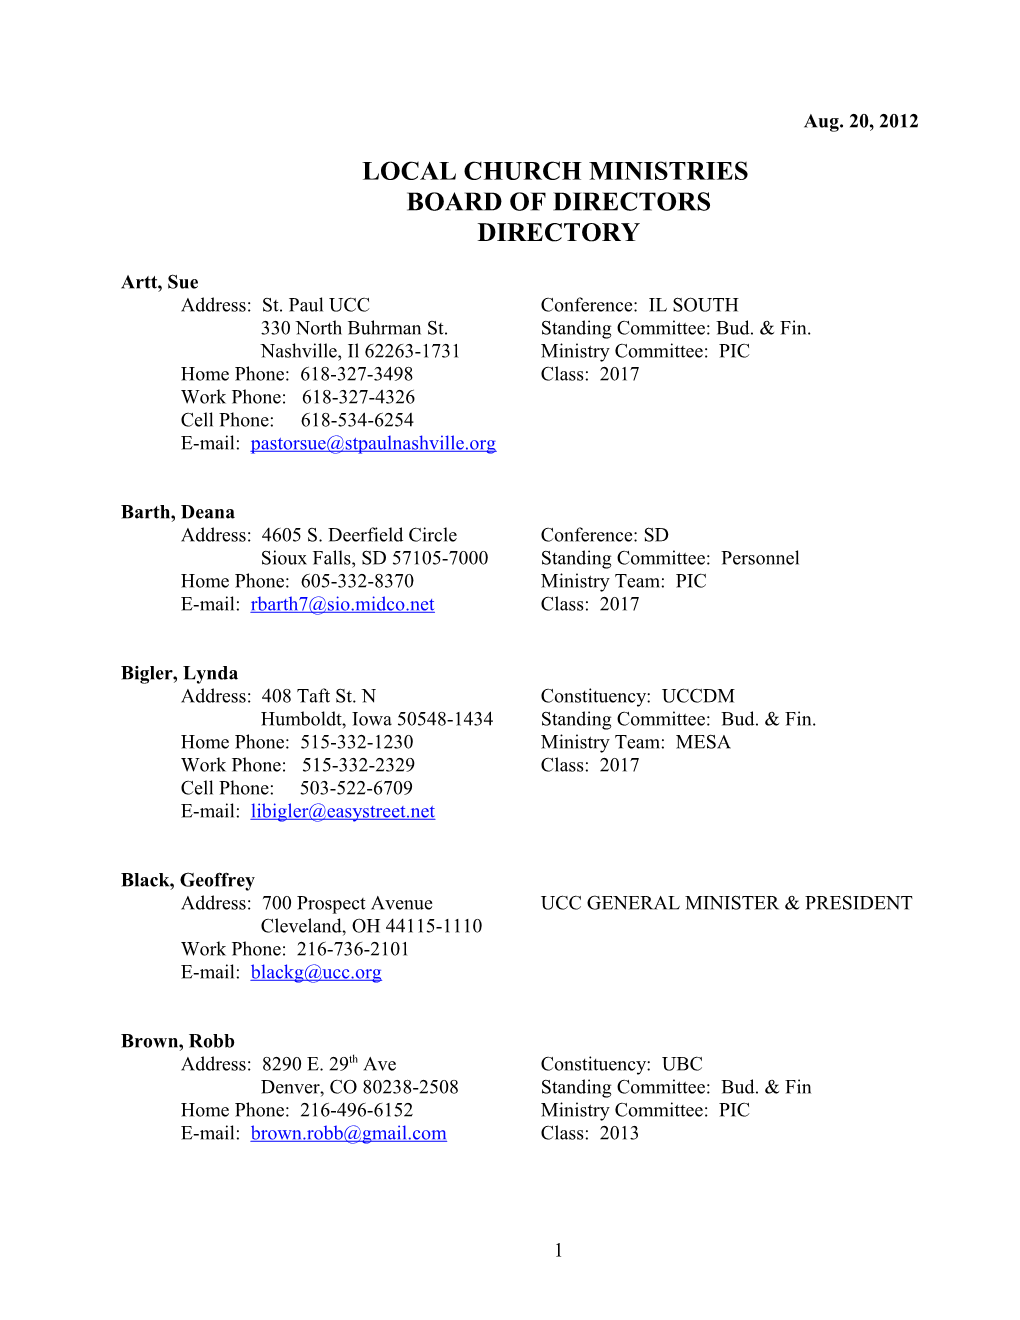 Local Church Ministries Board of Directors Roster